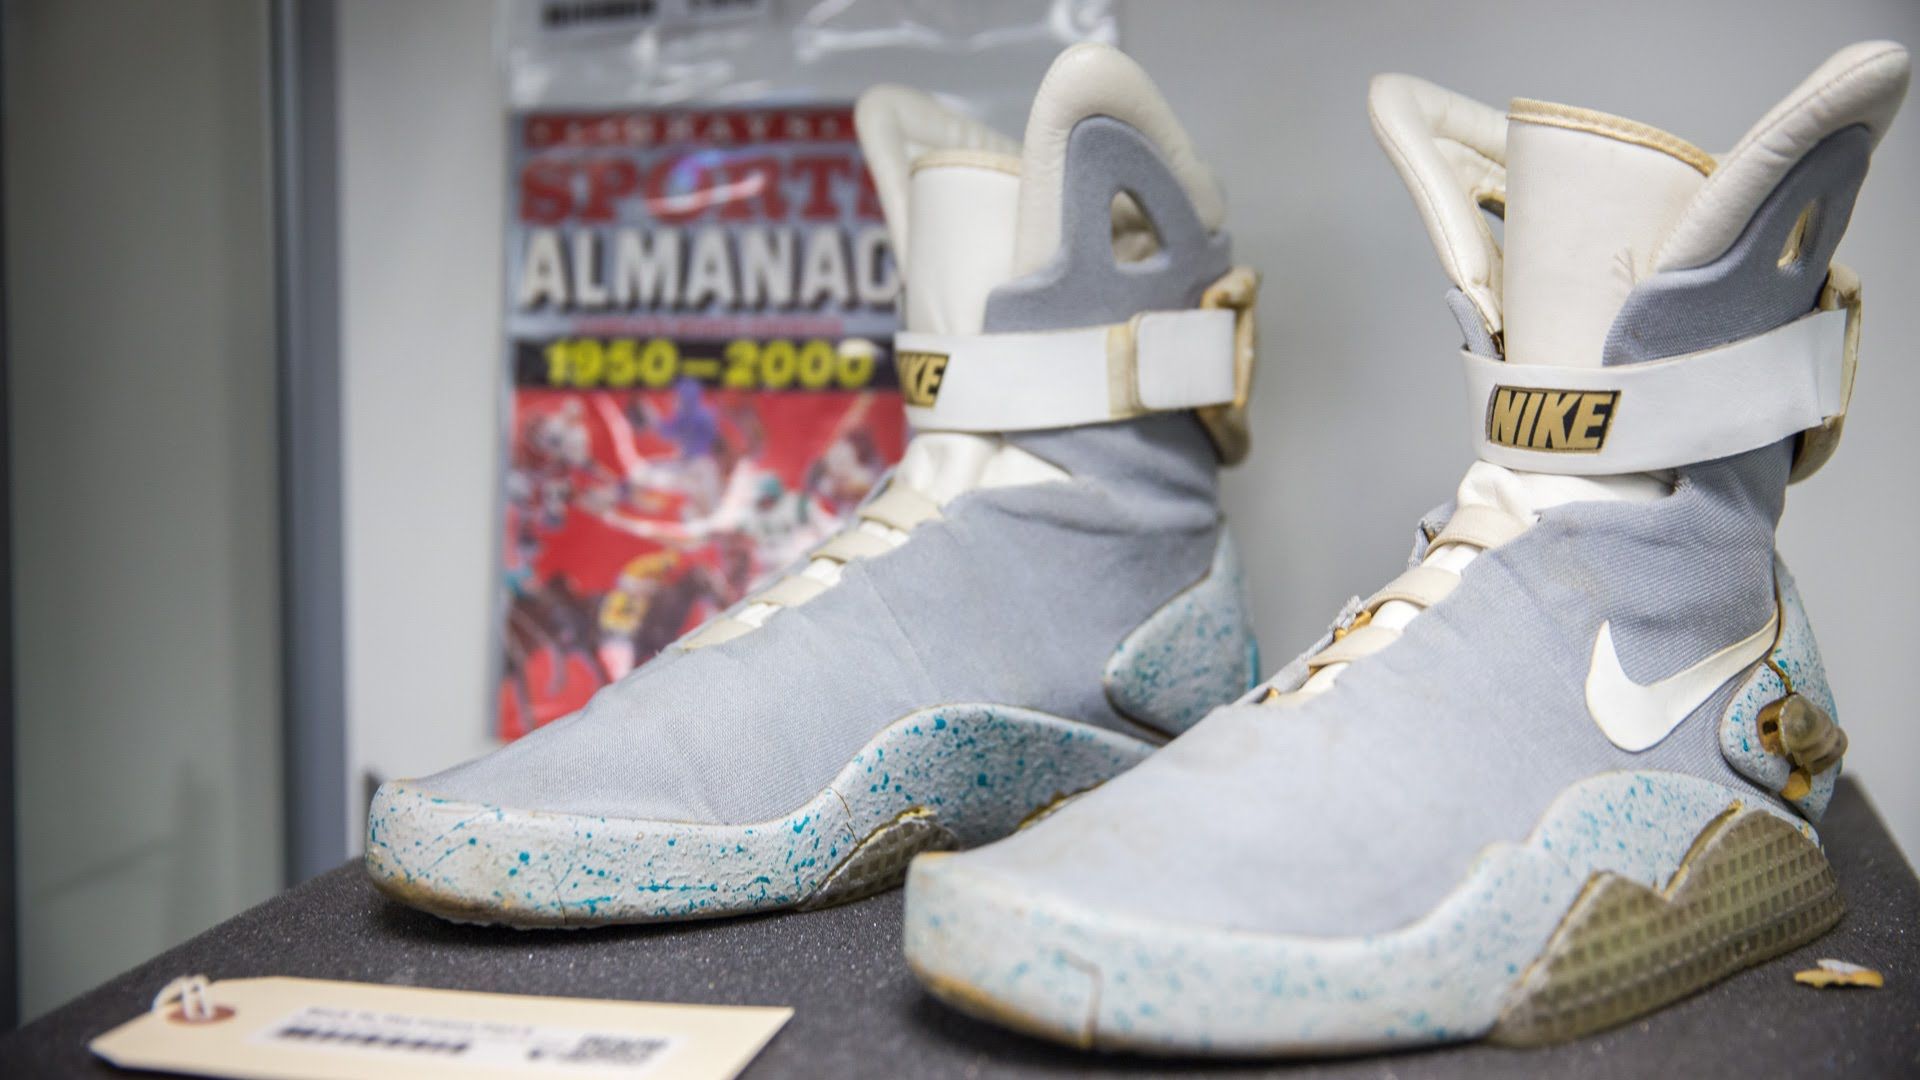 The Real Nike Air Mag Worn By Marty McFly Actually Still Exists Today! • KicksOnFire.com